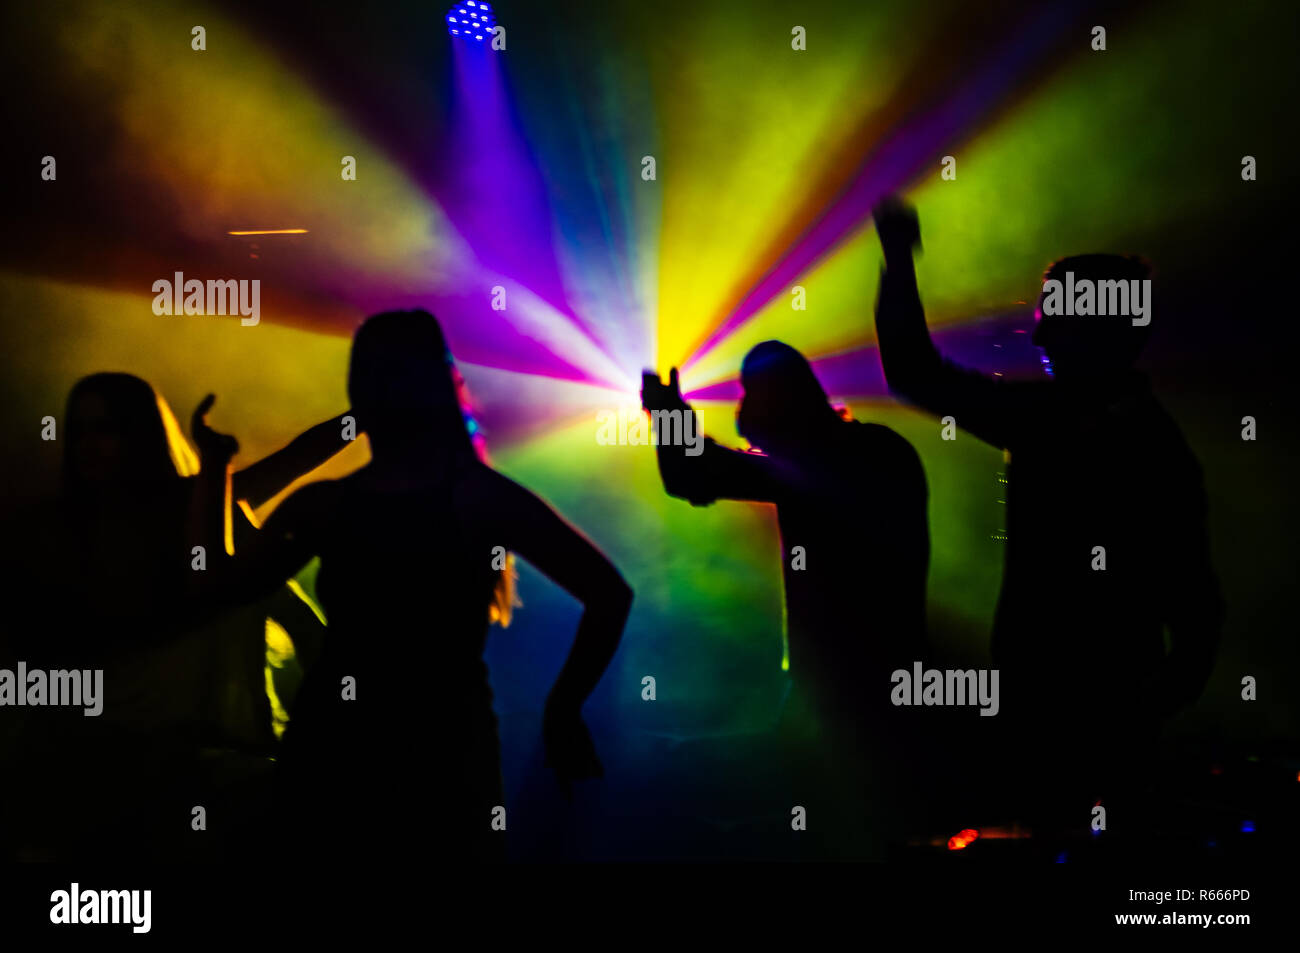 Male and Female dancers silhouetted by the lights in the night club. Stock Photo